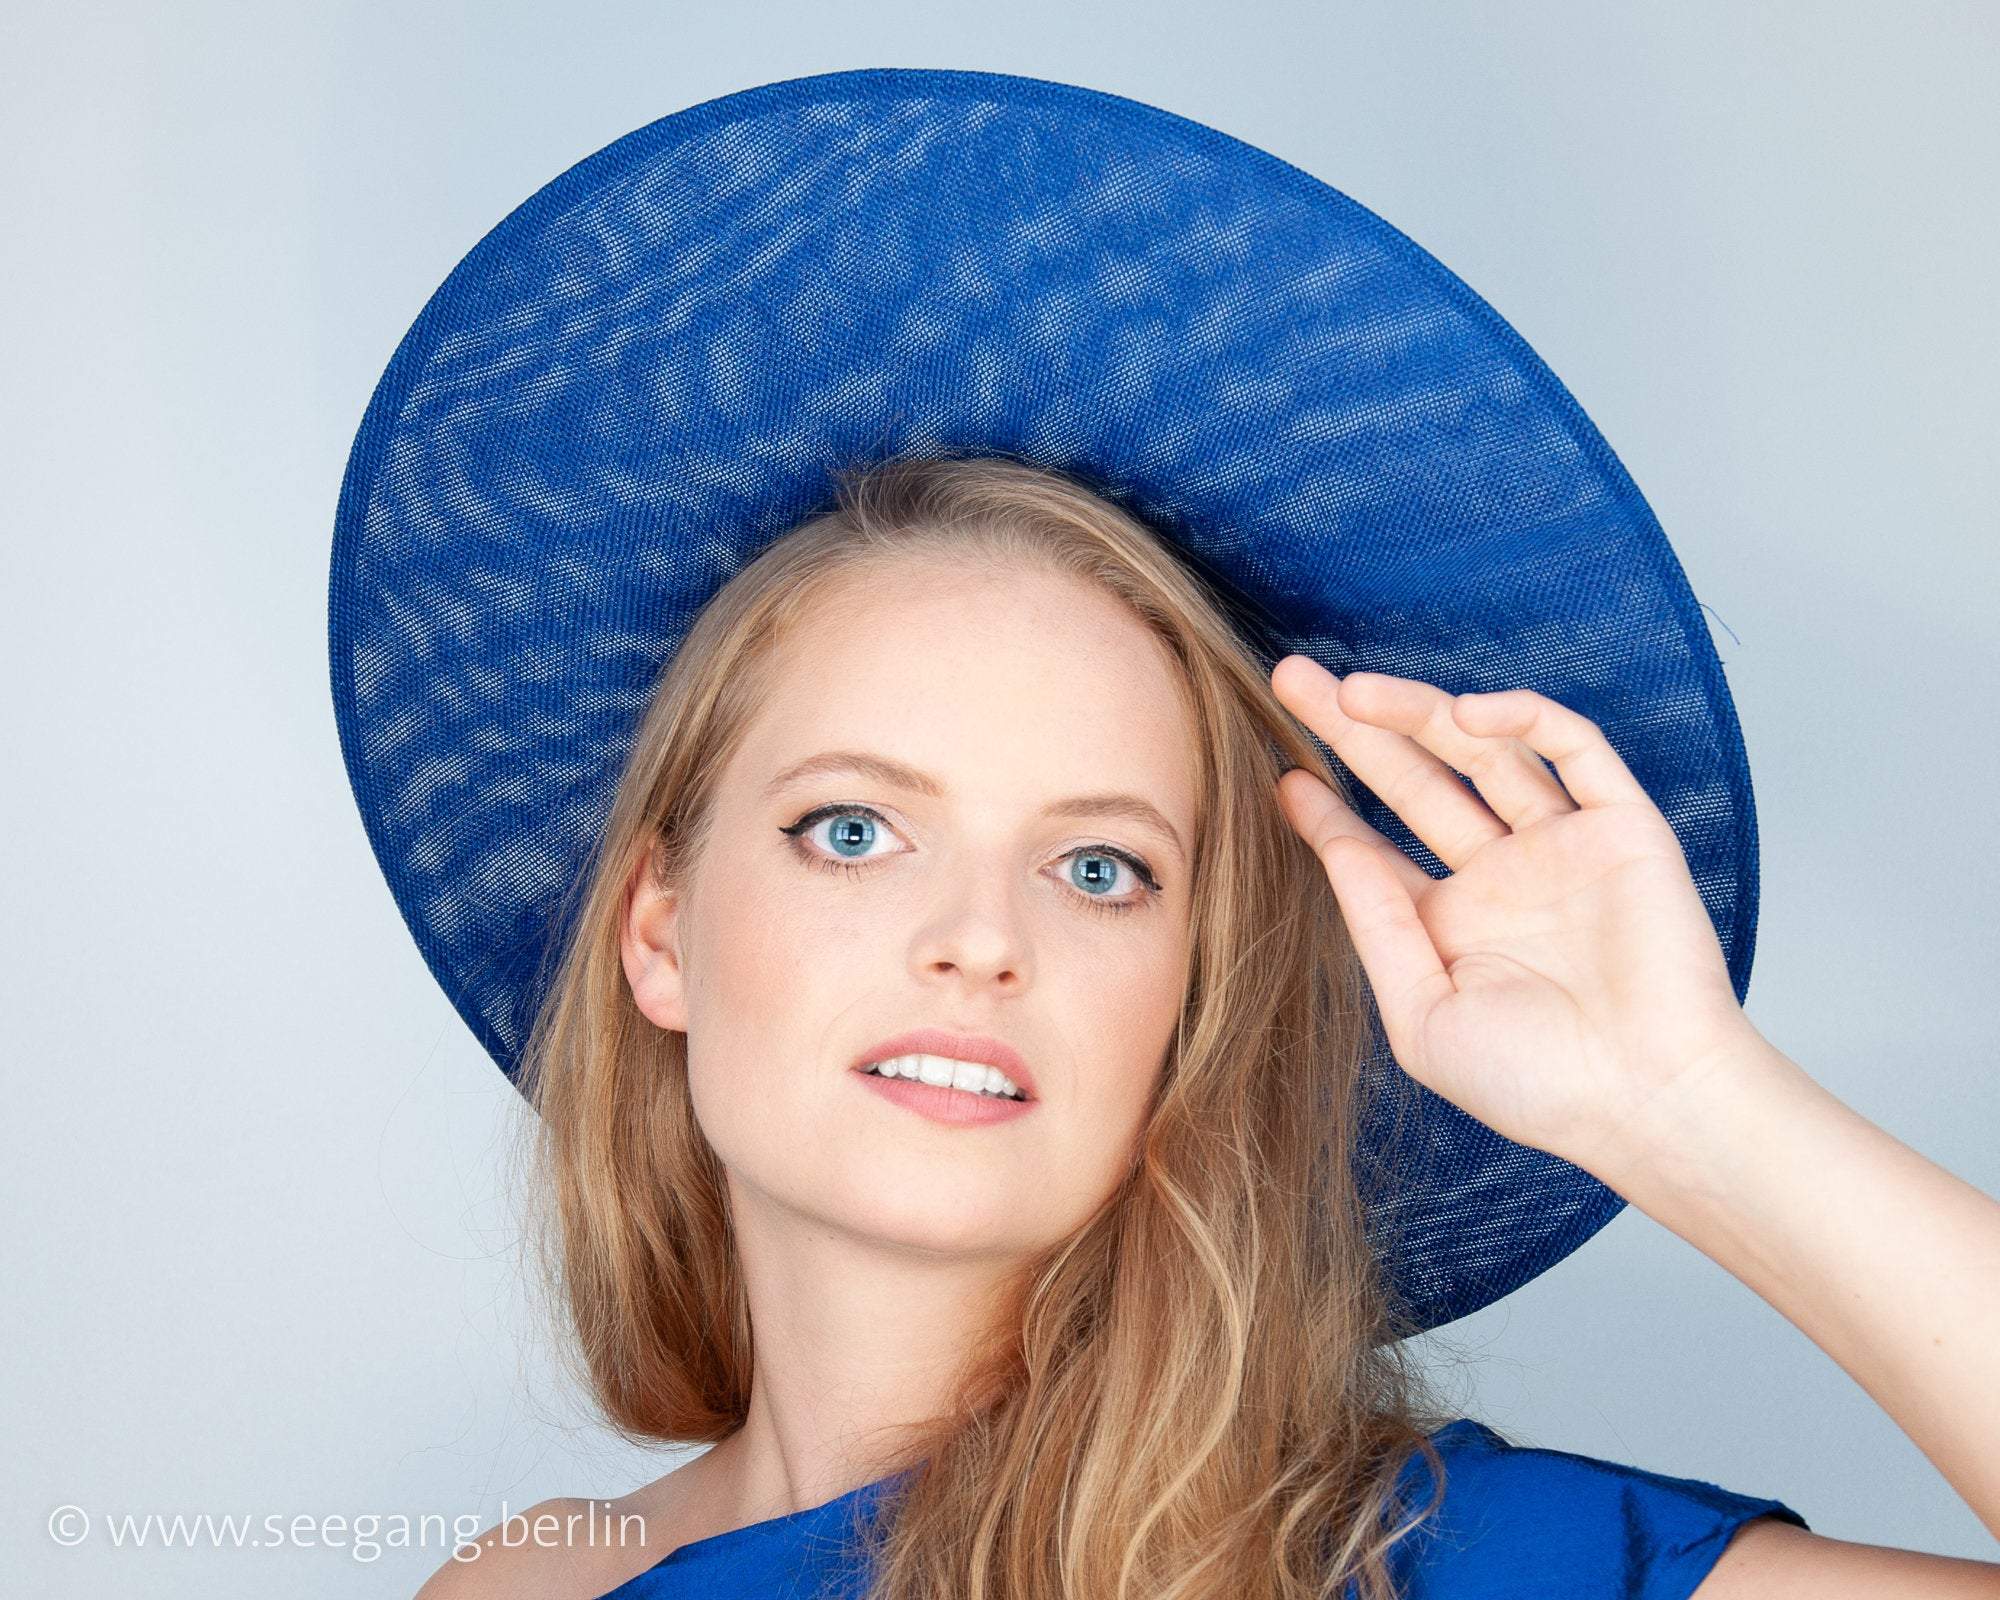 HALO HAT - SUMMER HAT FOR A STUNNING, FRESH AND LIGHT LOOK COLOUR TEAL OR PETROL GREEN © Seegang Berlin